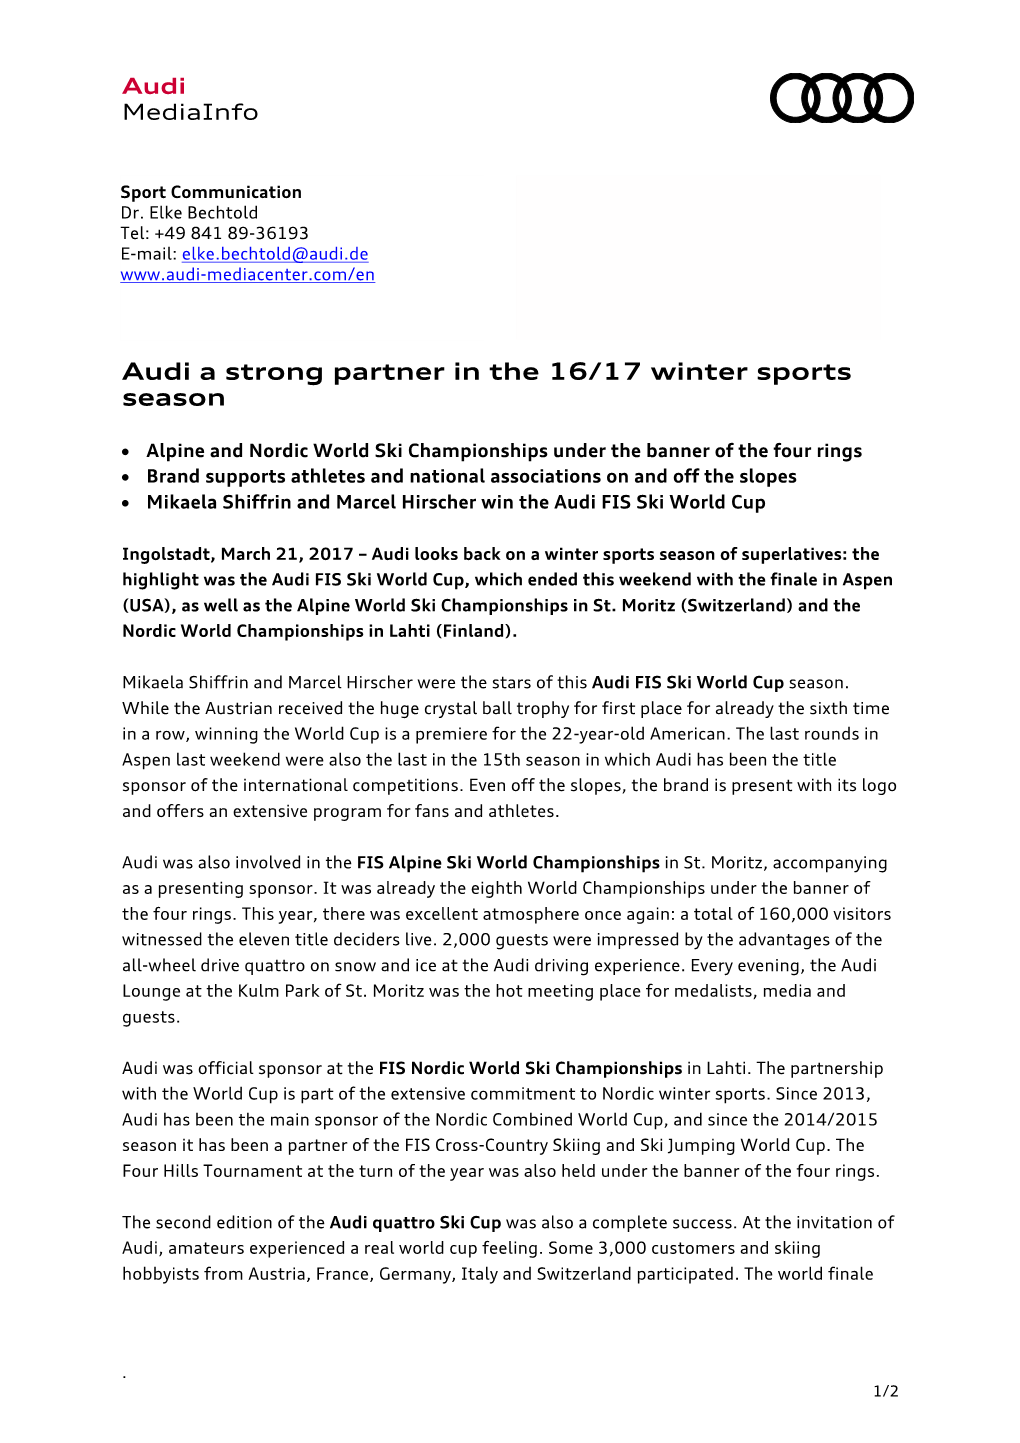 Audi a Strong Partner in the 16/17 Winter Sports Season